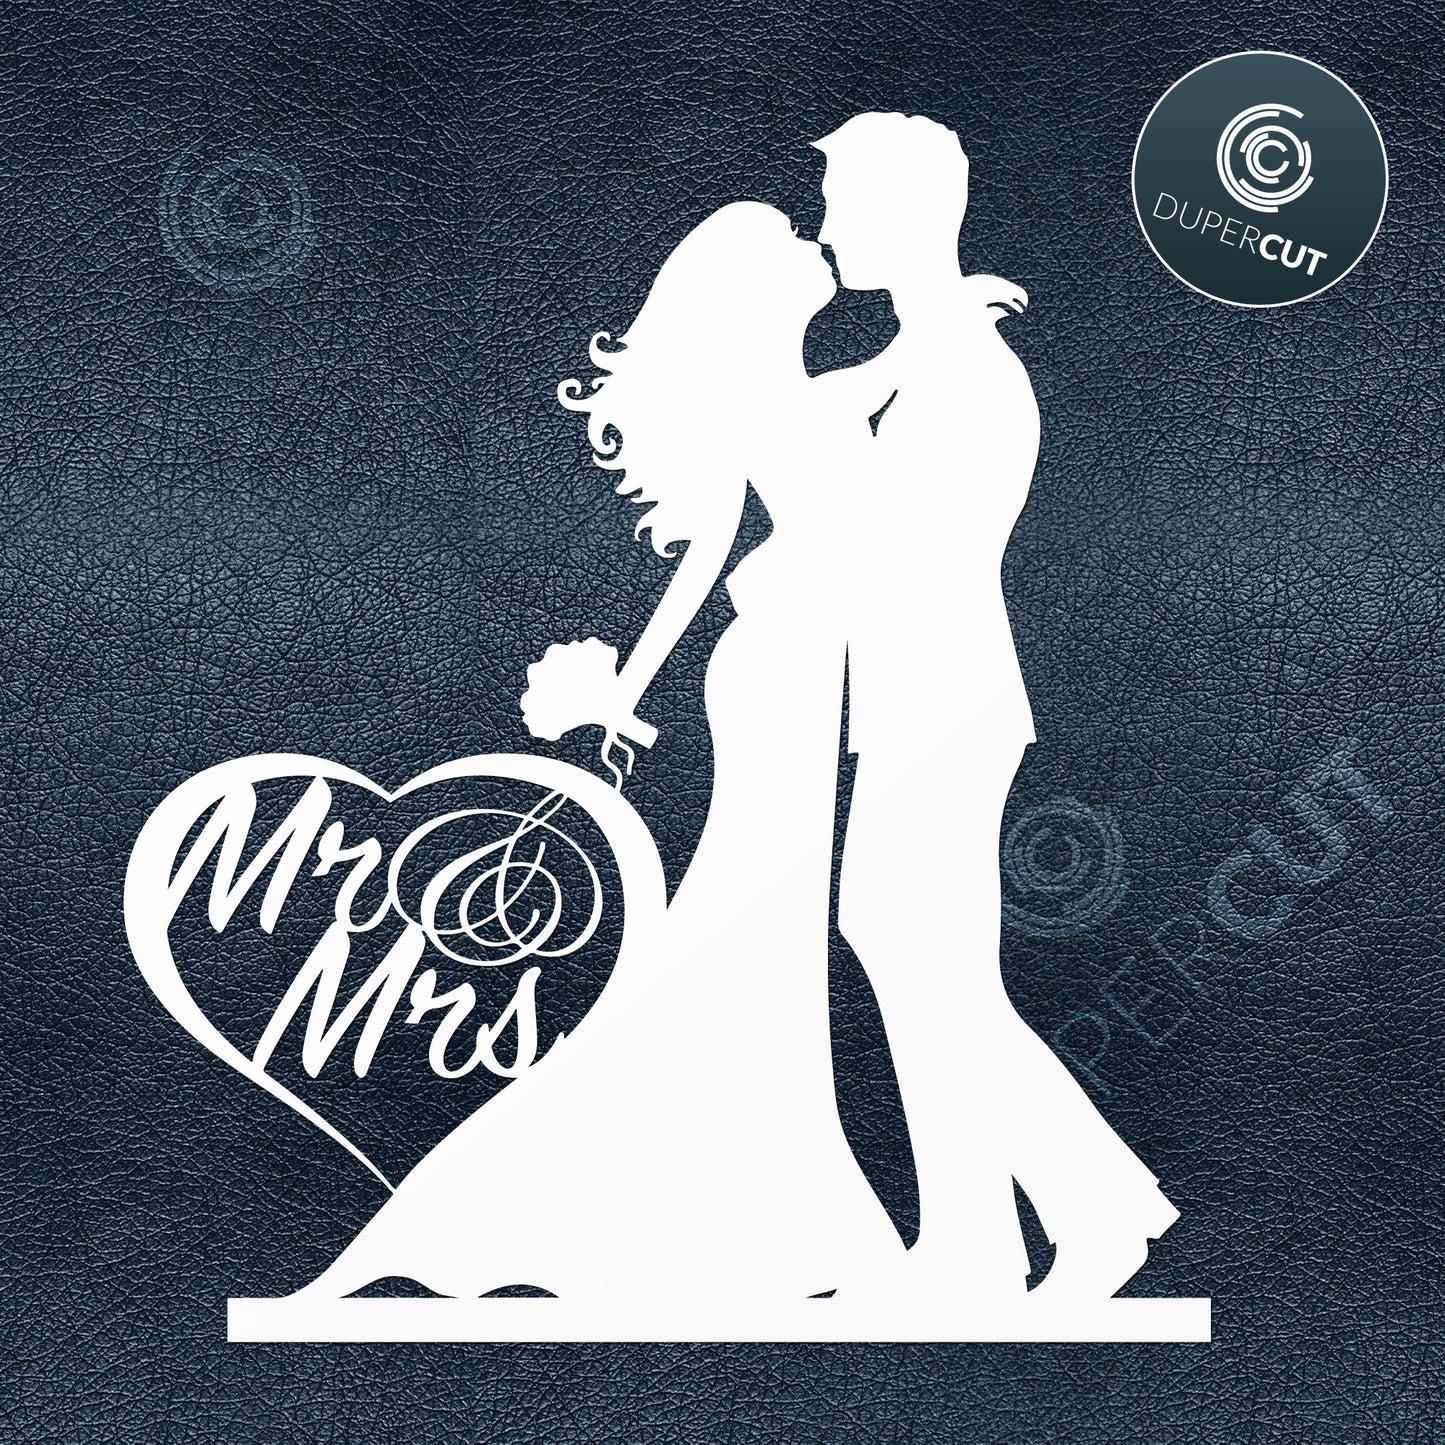 Mr & Mrs cake topper. Paper cutting template SVG PNG DXF files. For DIY projects Cricut, Glowforge, Silhouette Cameo, CNC Machines.